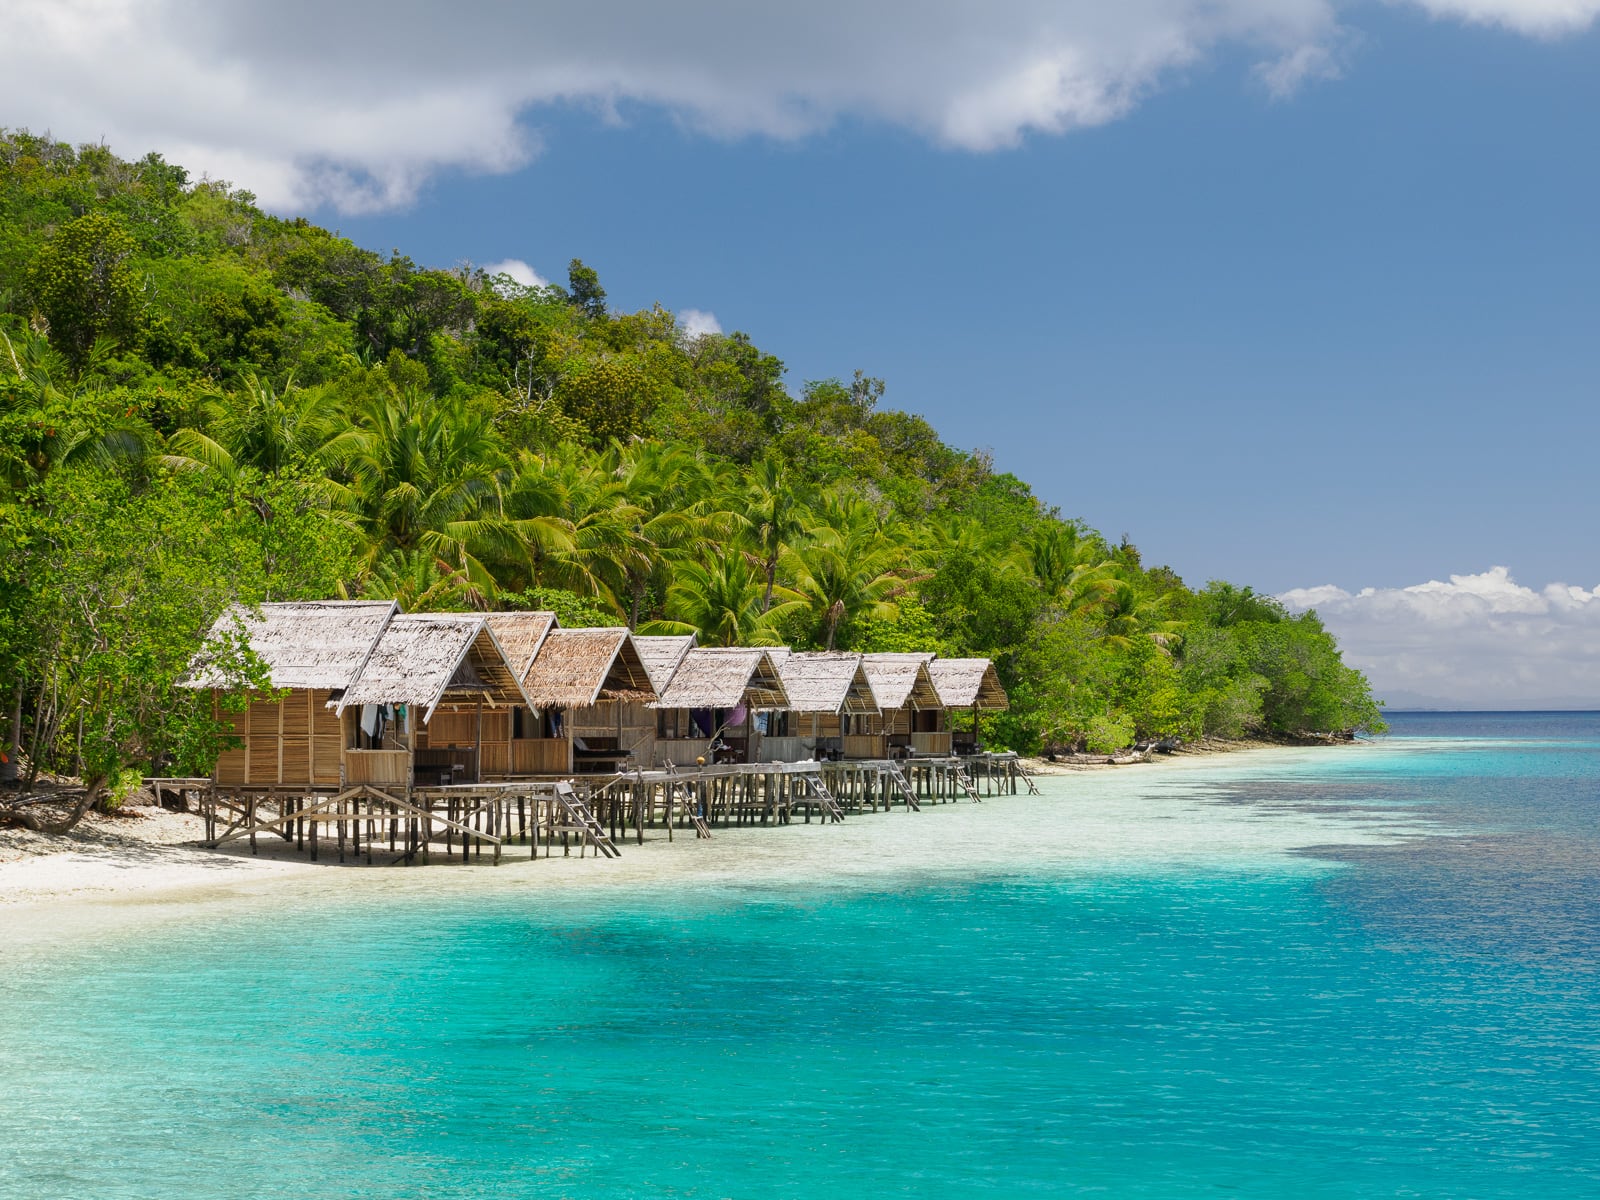 Turquoise sea, a strip of sand with a row of palm-thatch bungalows on stilts, set against a green forested hillside